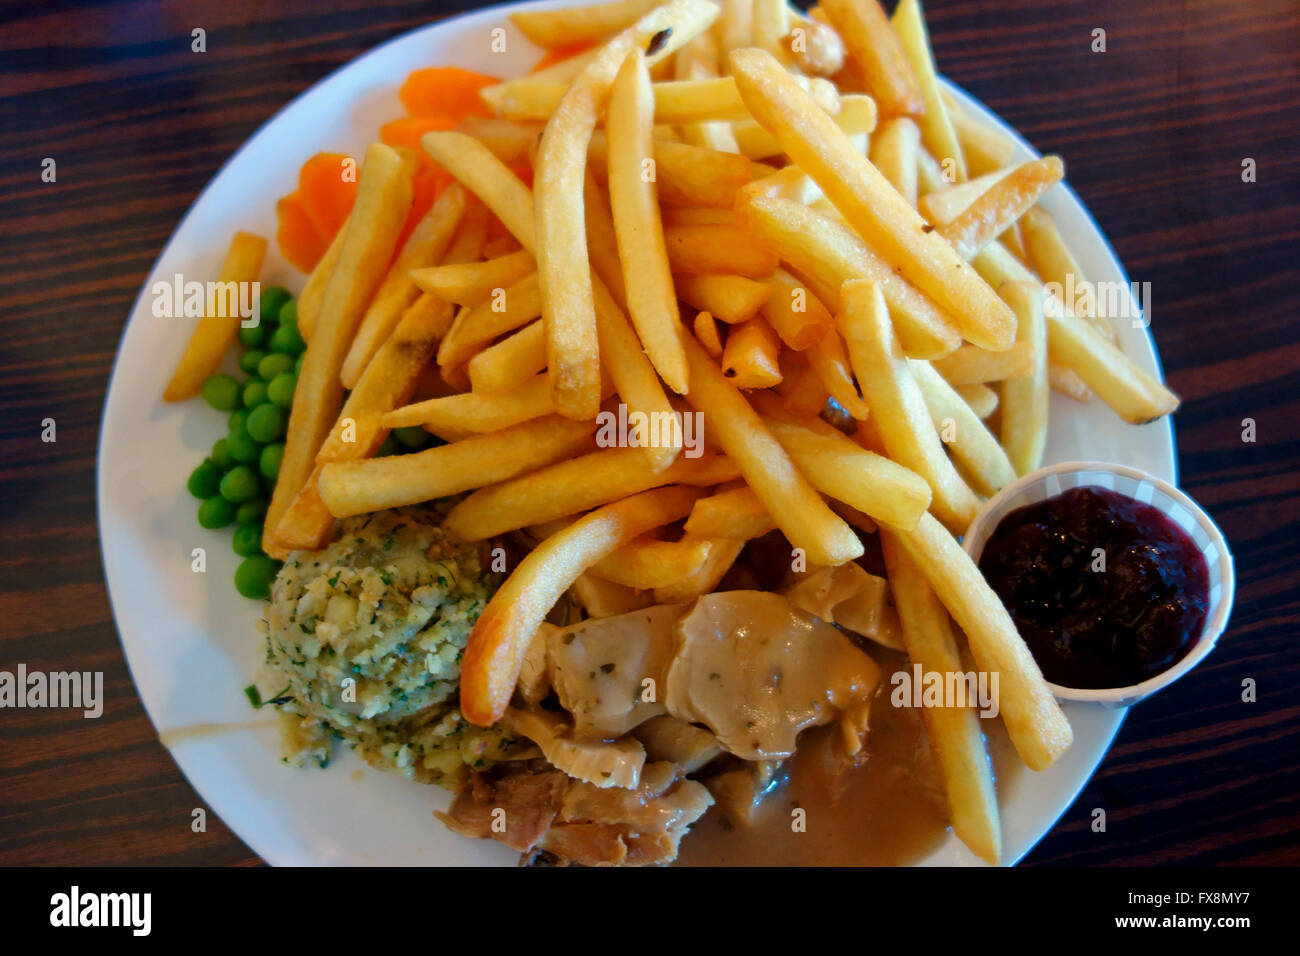 A turkey dinner with french fries Stock Photo